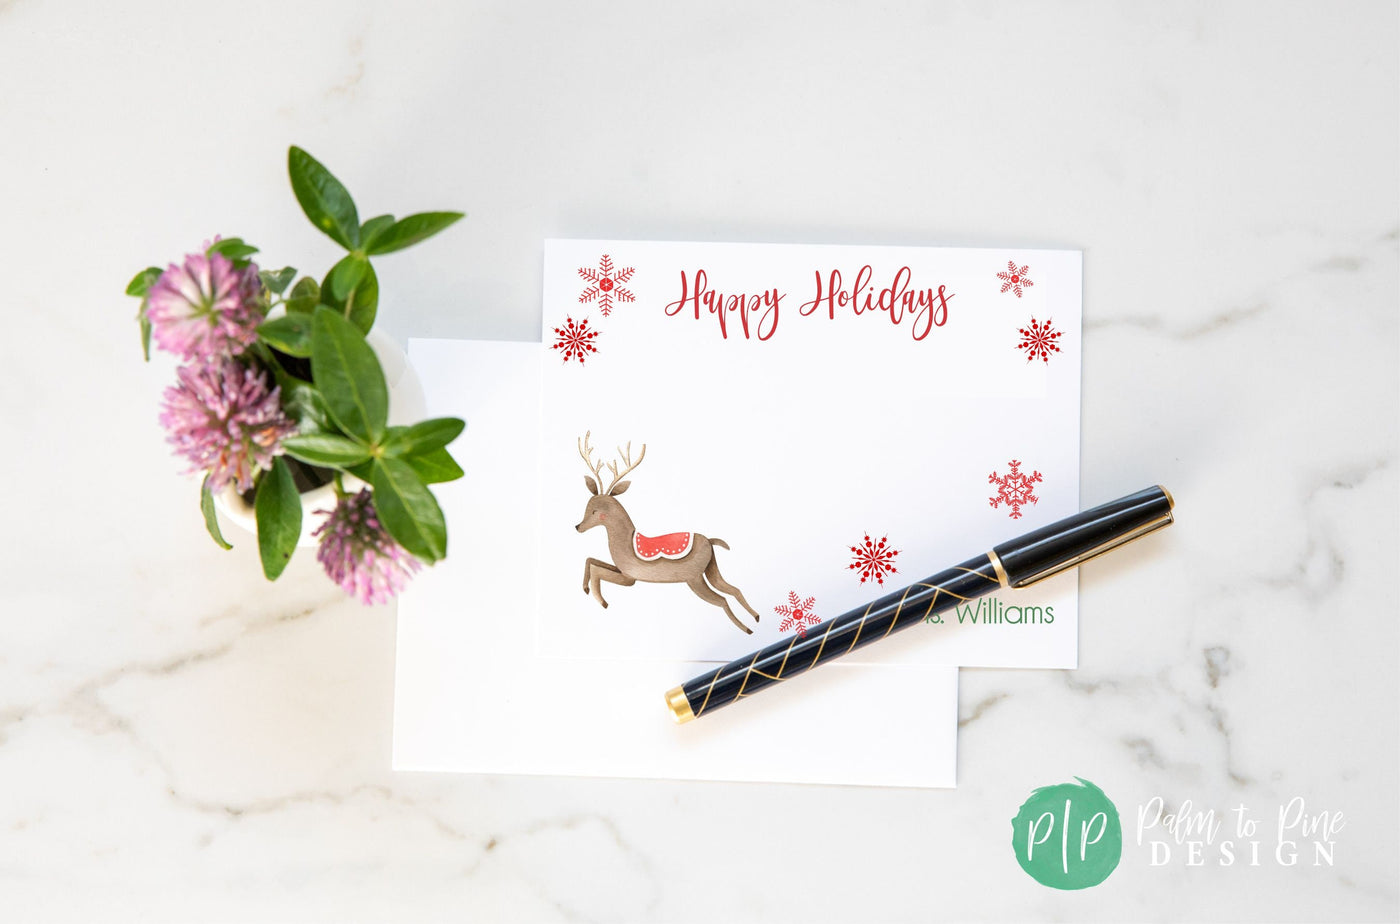 Personalized Holiday Stationery, Holiday Thank You Cards, Christmas Stationary Cards, Teacher Stationary, Custom Stationary for Teachers